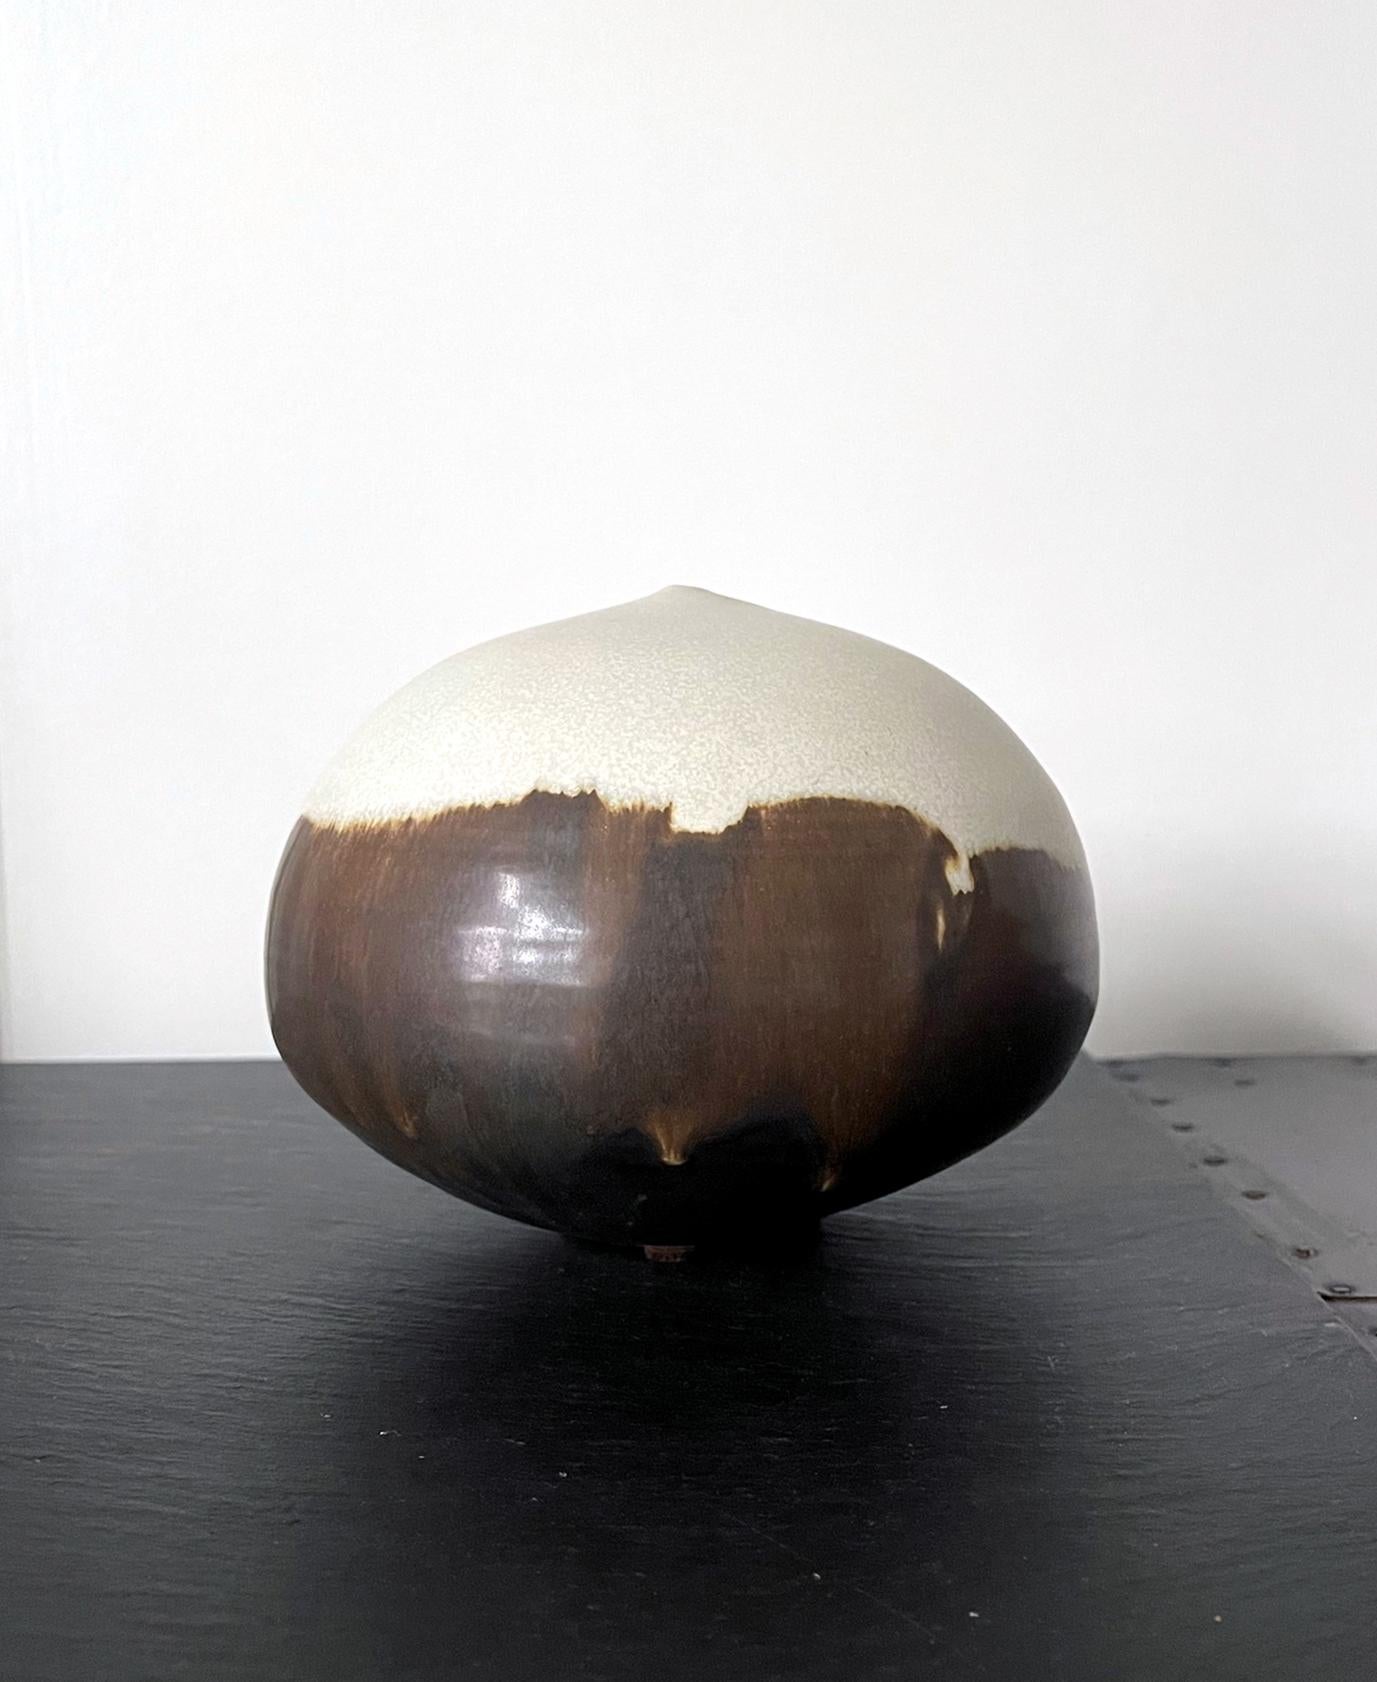 A ceramic closed-form pot by Japanese American artist Toshiko Takaezu (American, 1922 - 2011). This iconic form by the artist takes the simplest organic form but is instilled with a deeper philosophy. The void space and the air trapped inside of the